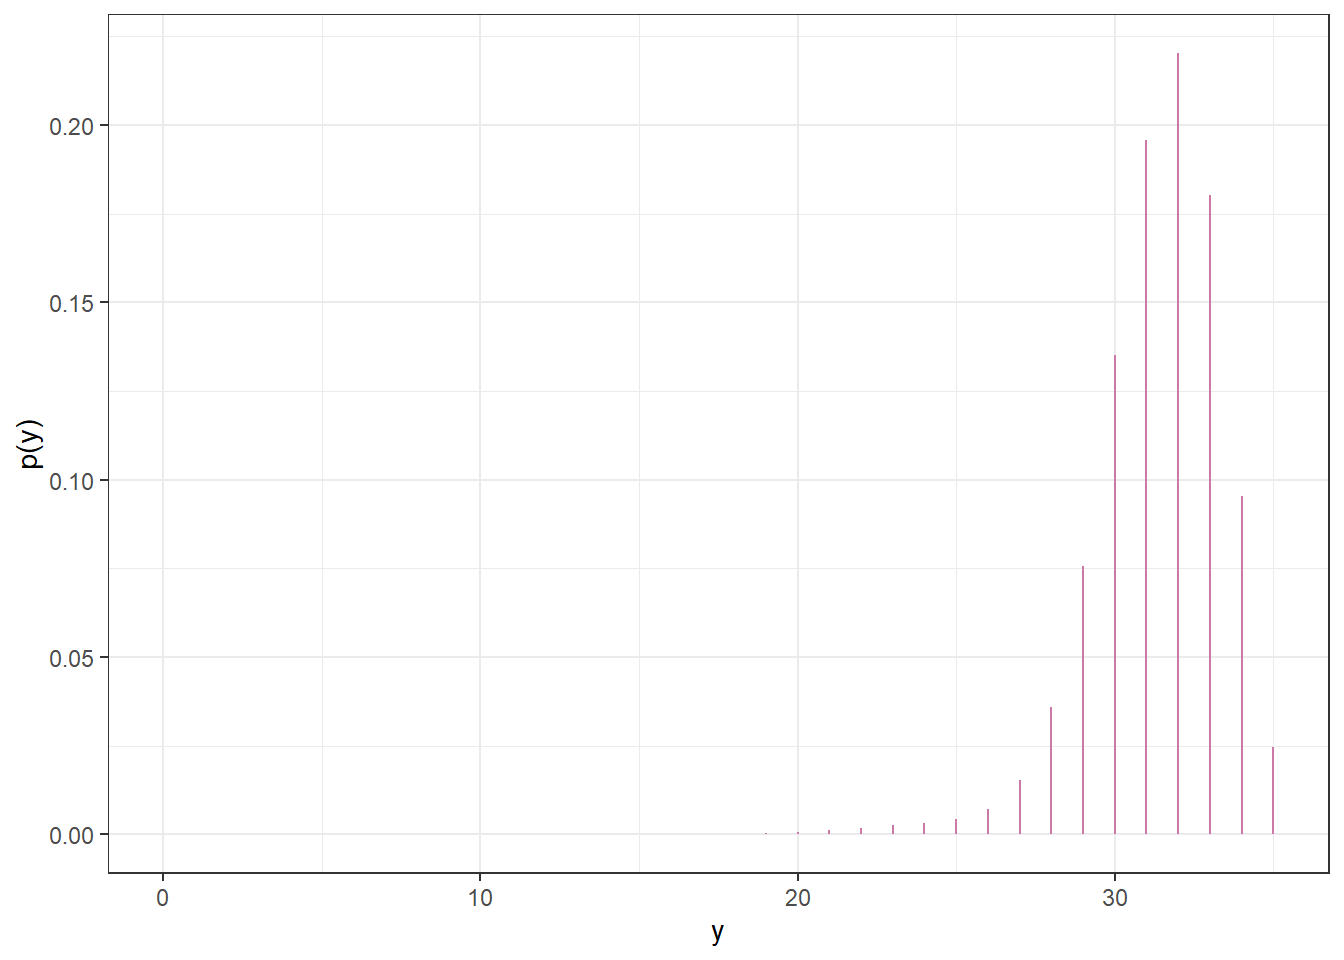 Posterior predictive distribution of \(Y\), the number of successes in samples of size \(n=35\), in Example 7.1 after observing data from a different sample of size 35.